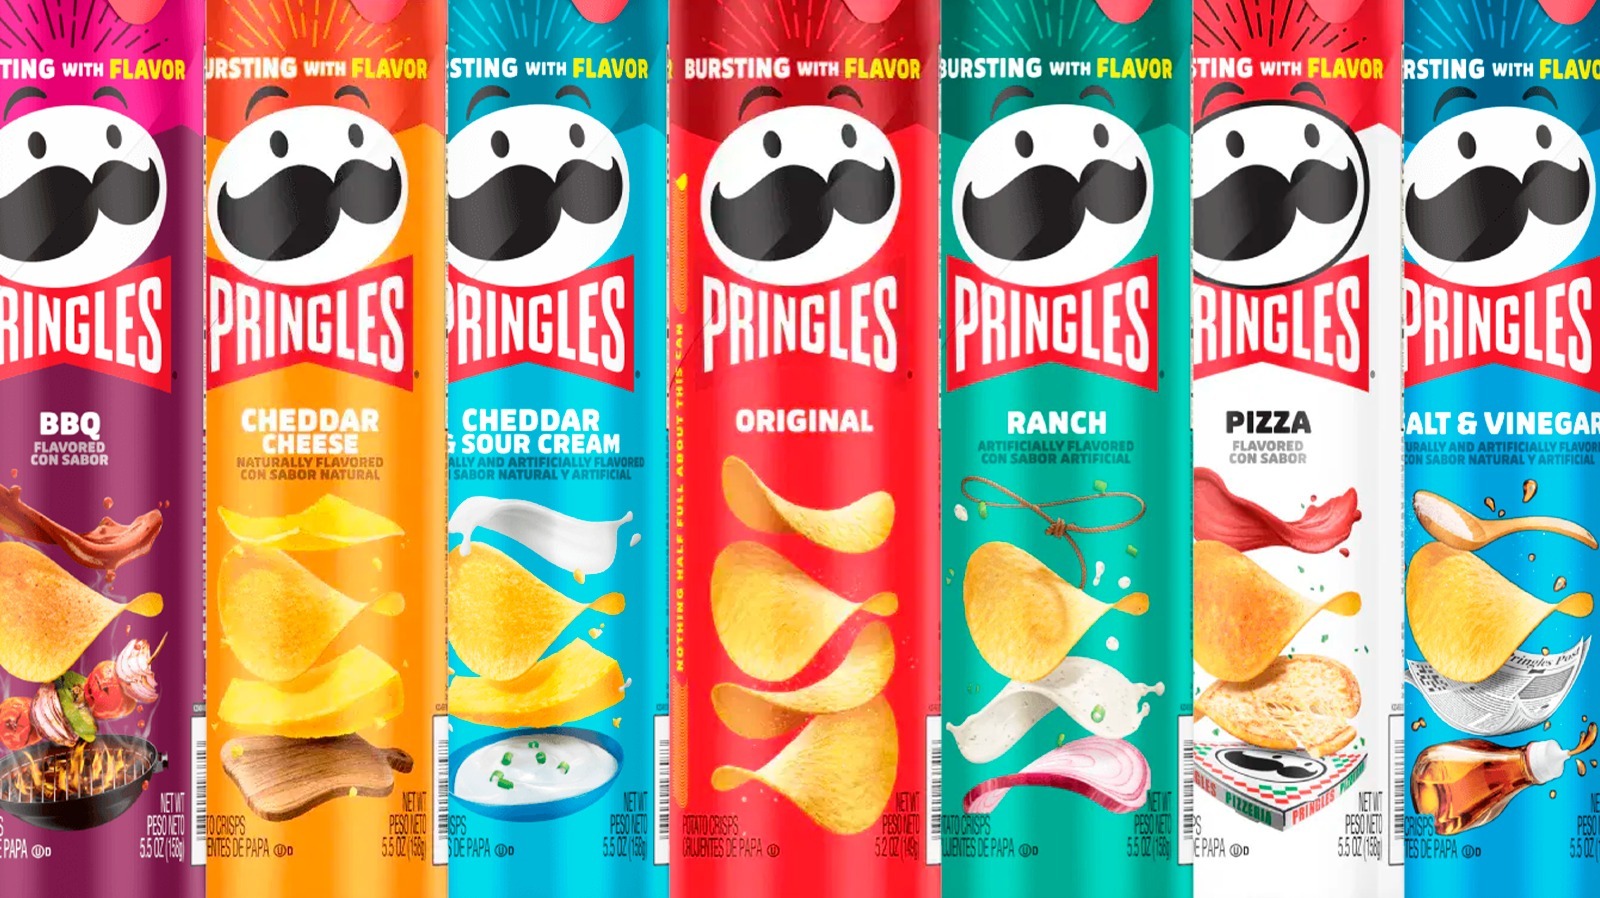 Ranking The Most Popular Pringles Flavors So You Don't Have To